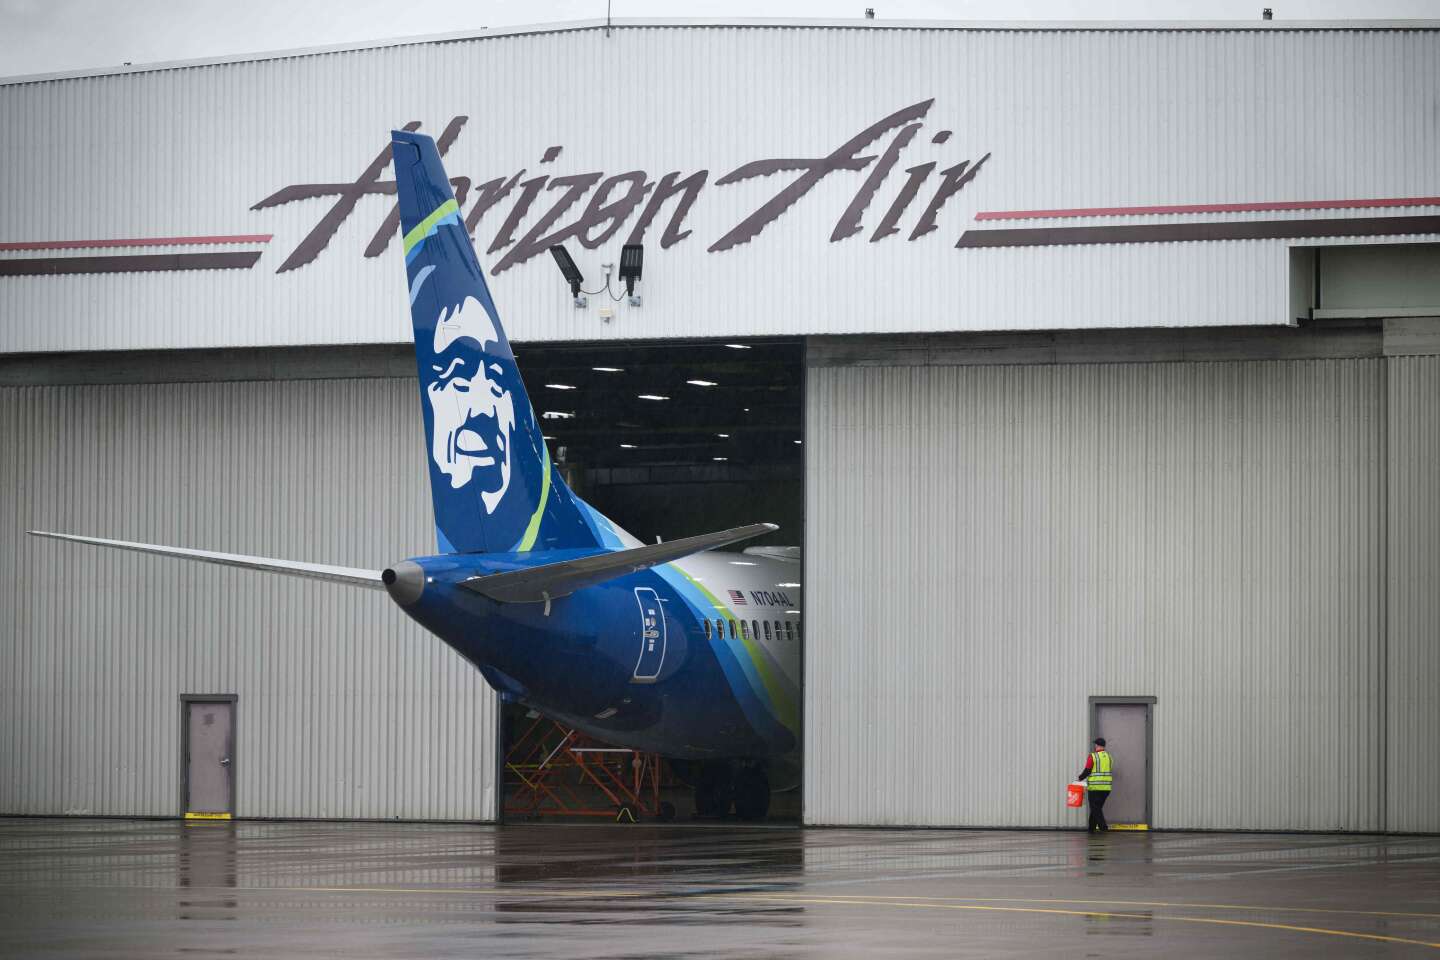 Boeing boss acknowledges a “mistake” after Alaska Airlines flight fails